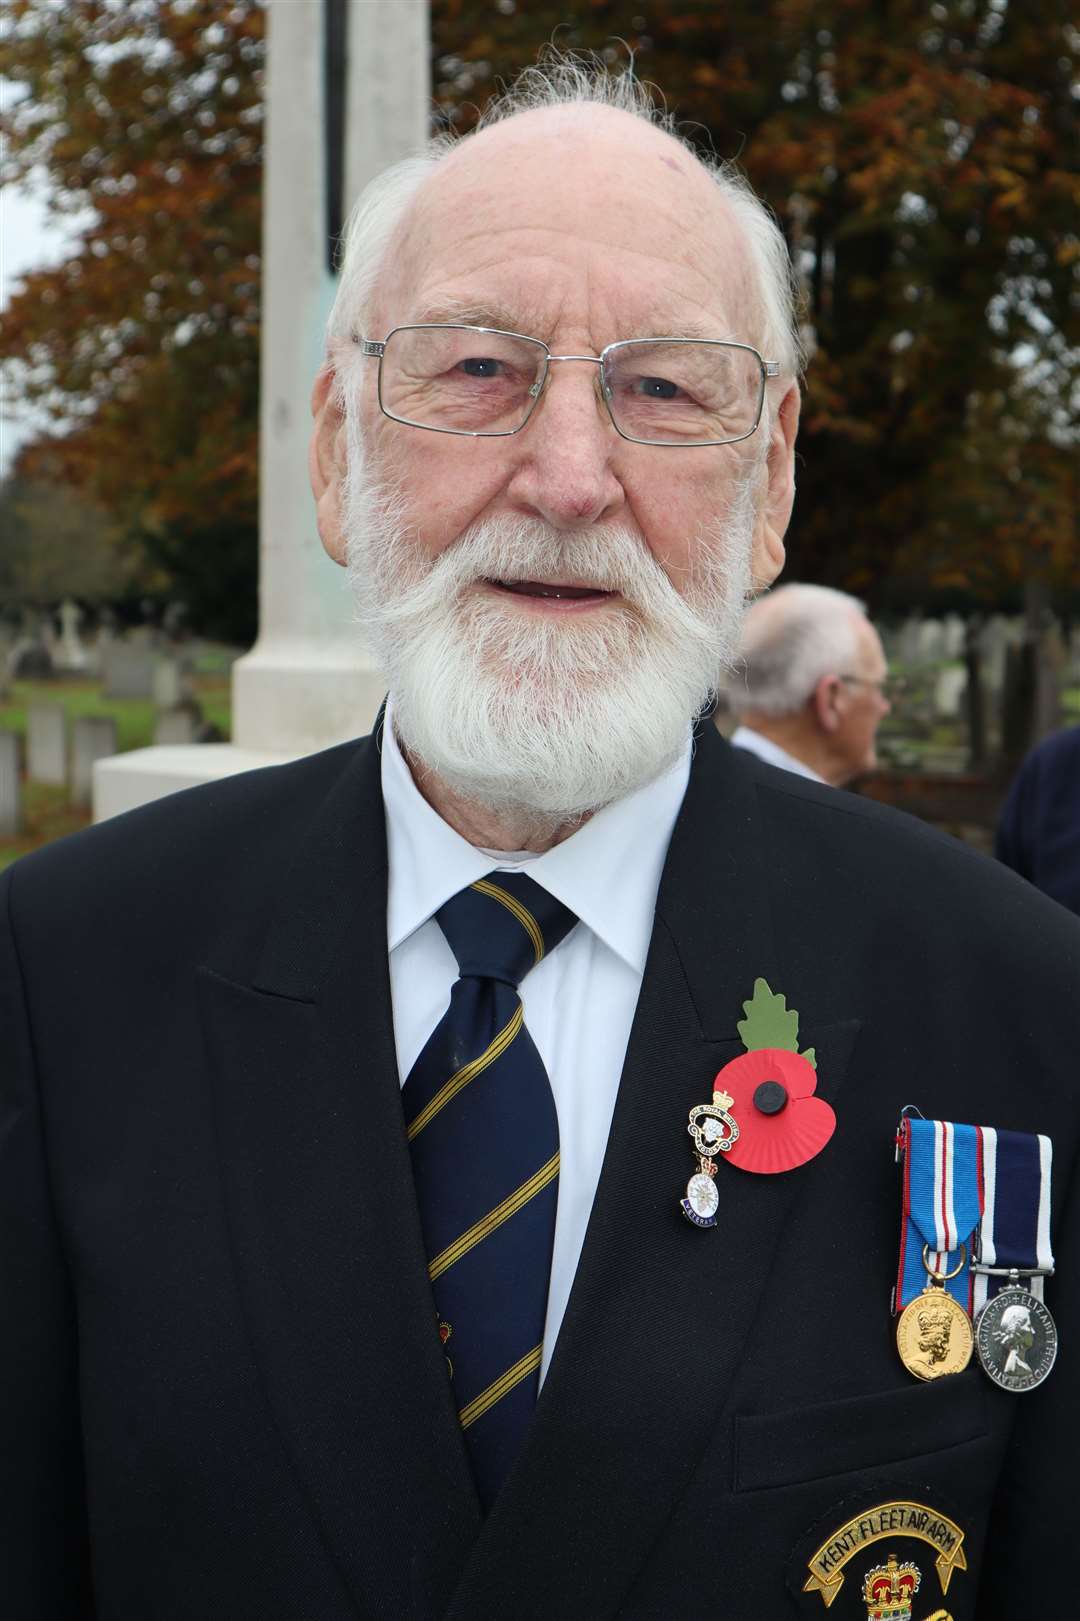 Mike Sanger, vice-chairman of the Sheppey branch of the Royal British Legion